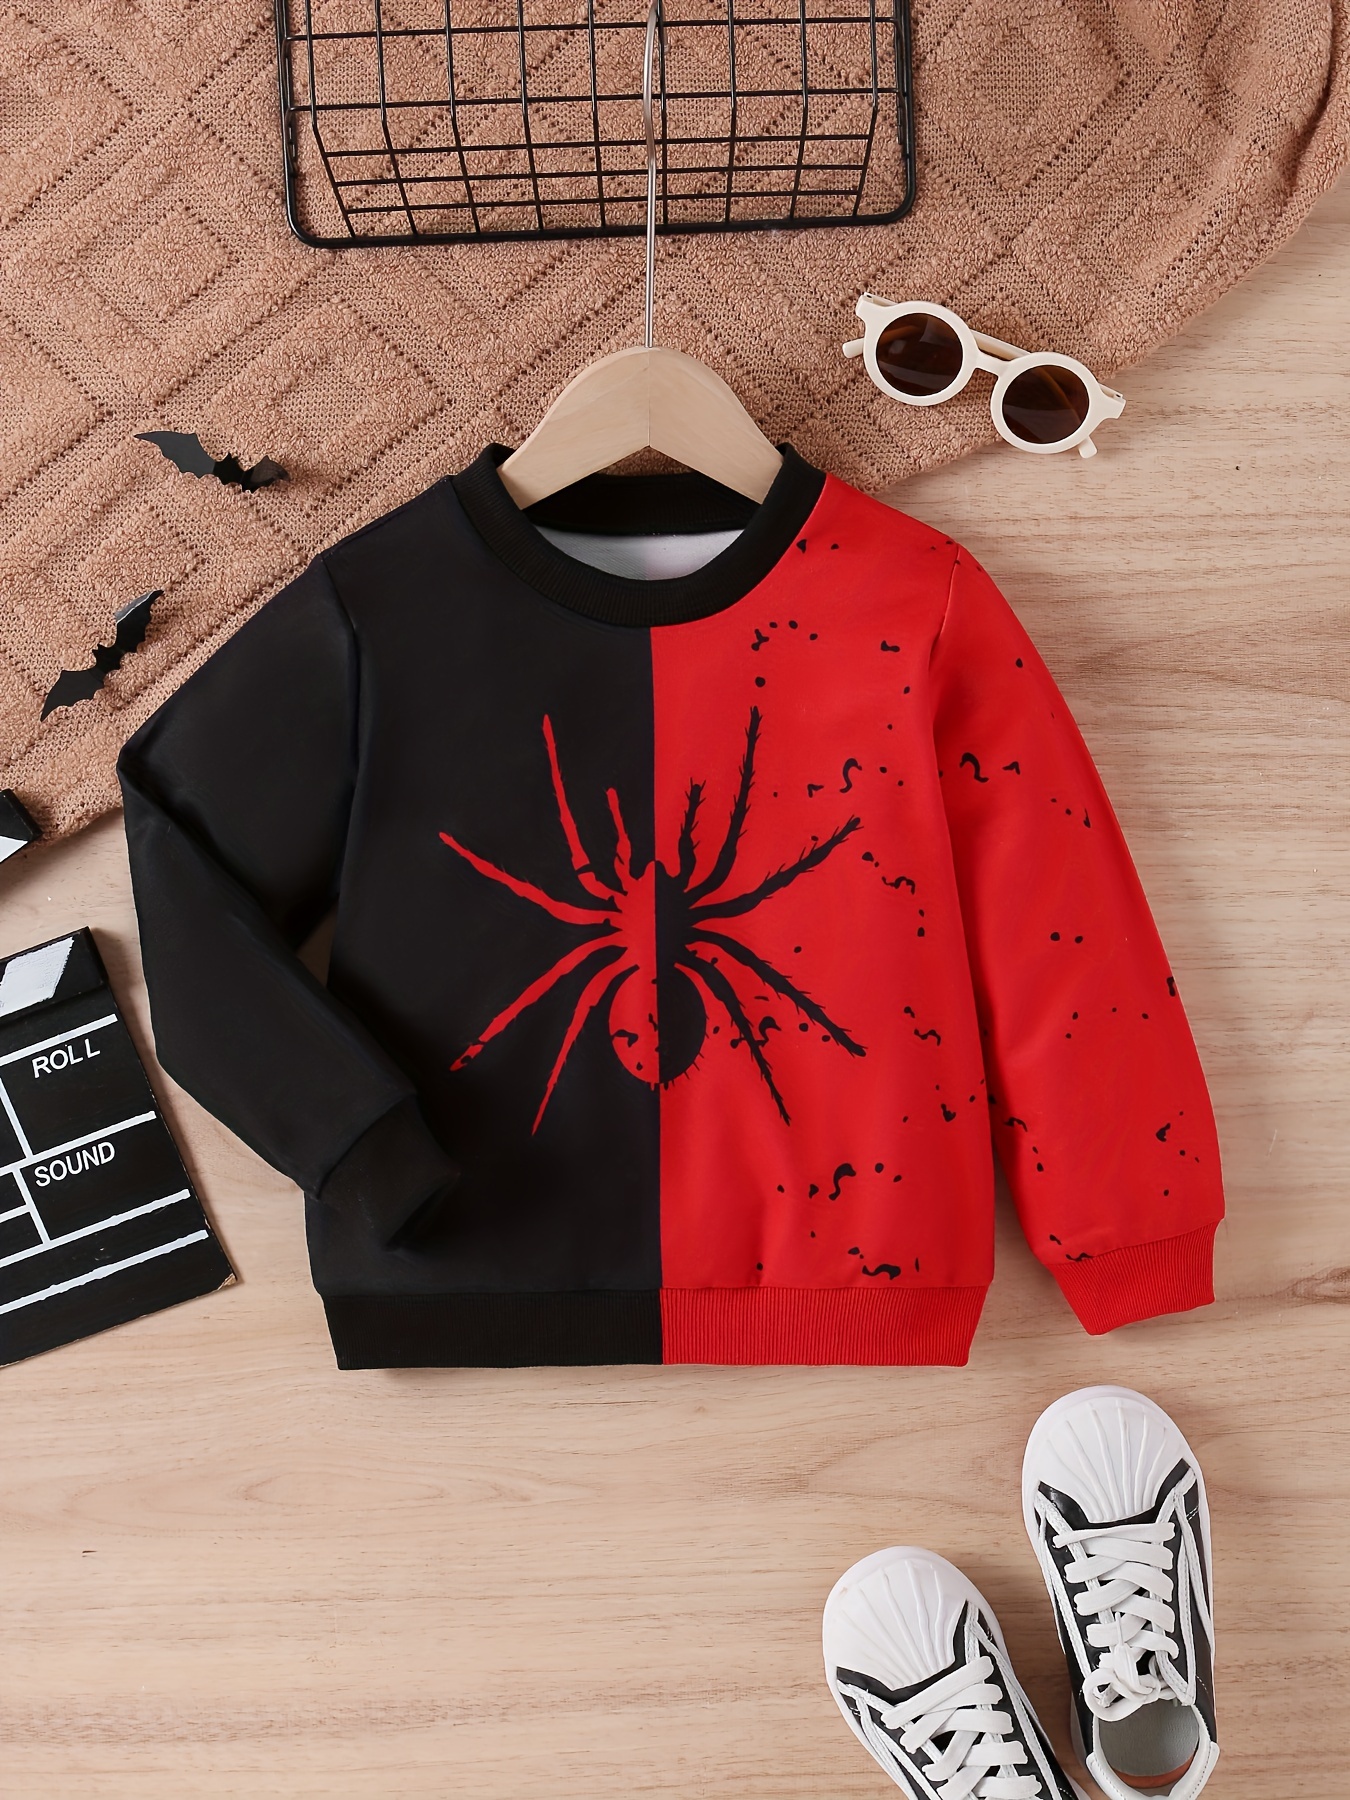 SHEIN 2pcs/Set Trendy And Cute Spider Printed Casual Comfortable Sweatshirt  Set For Toddler Boys, Spring And Autumn